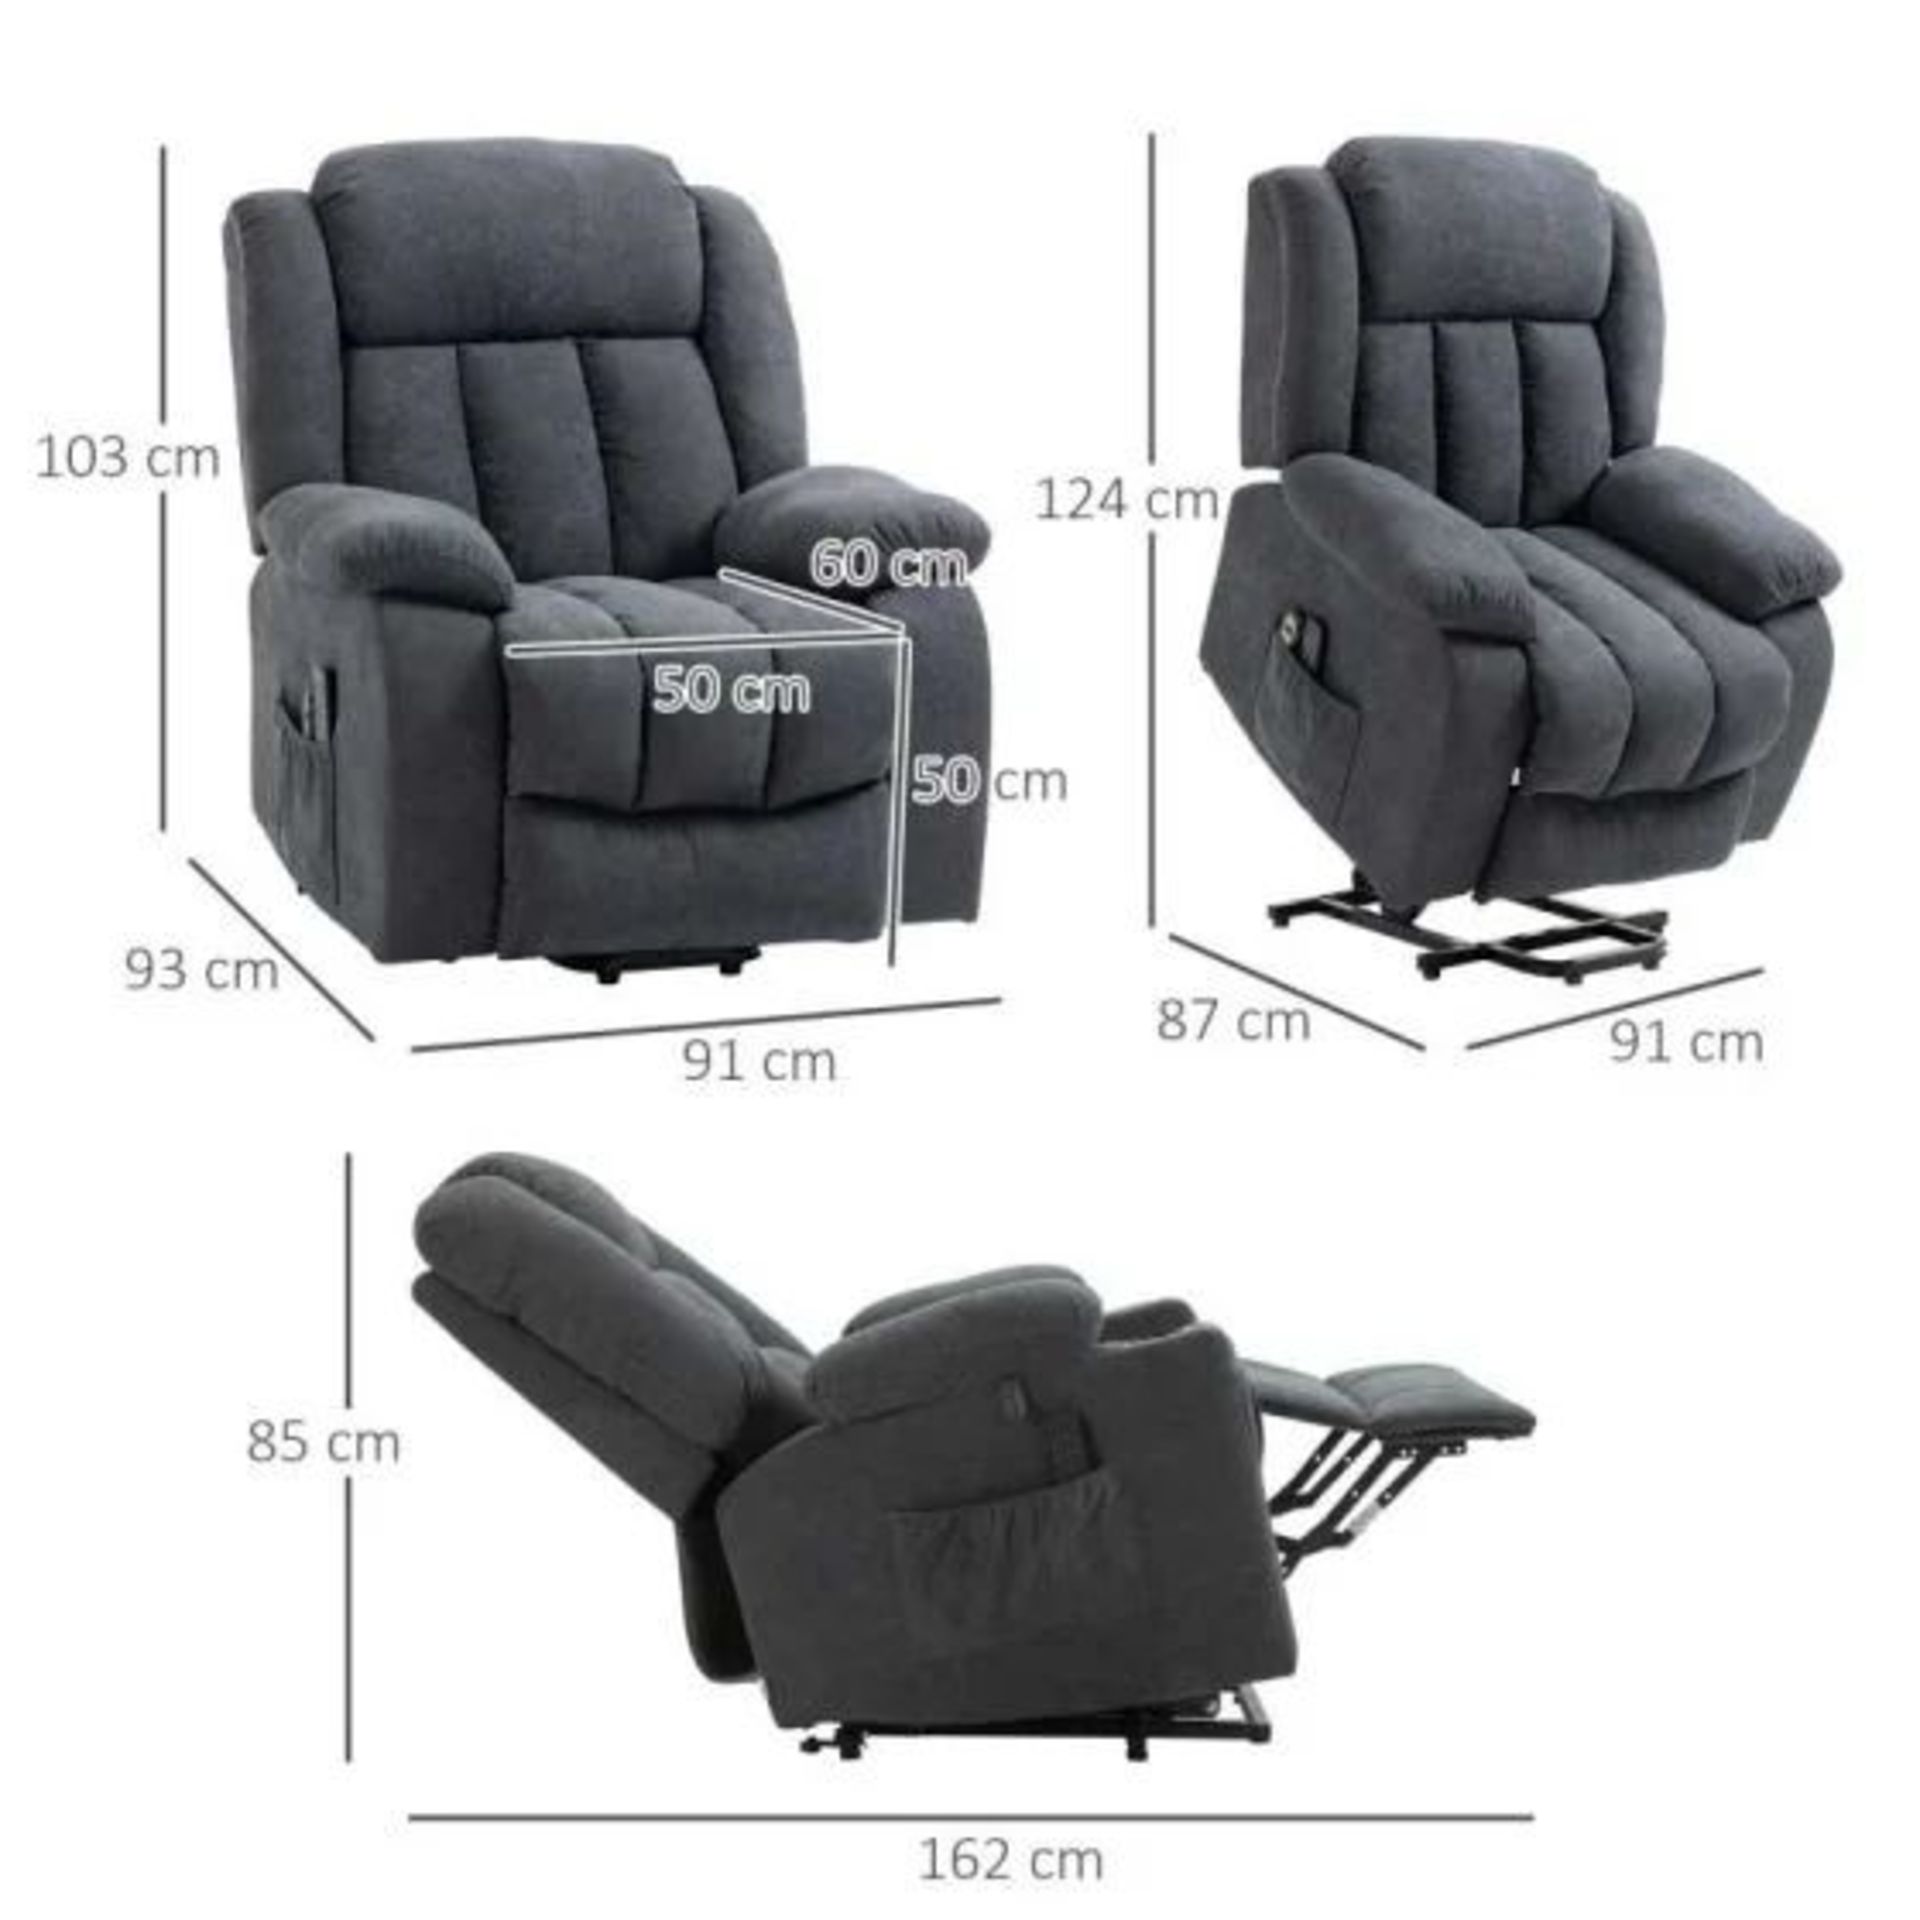 HOMCOM Oversized Electric & Rise Recliner Chair with Vibration Massage - Dark Grey. - Rack. RRP £ - Image 2 of 2